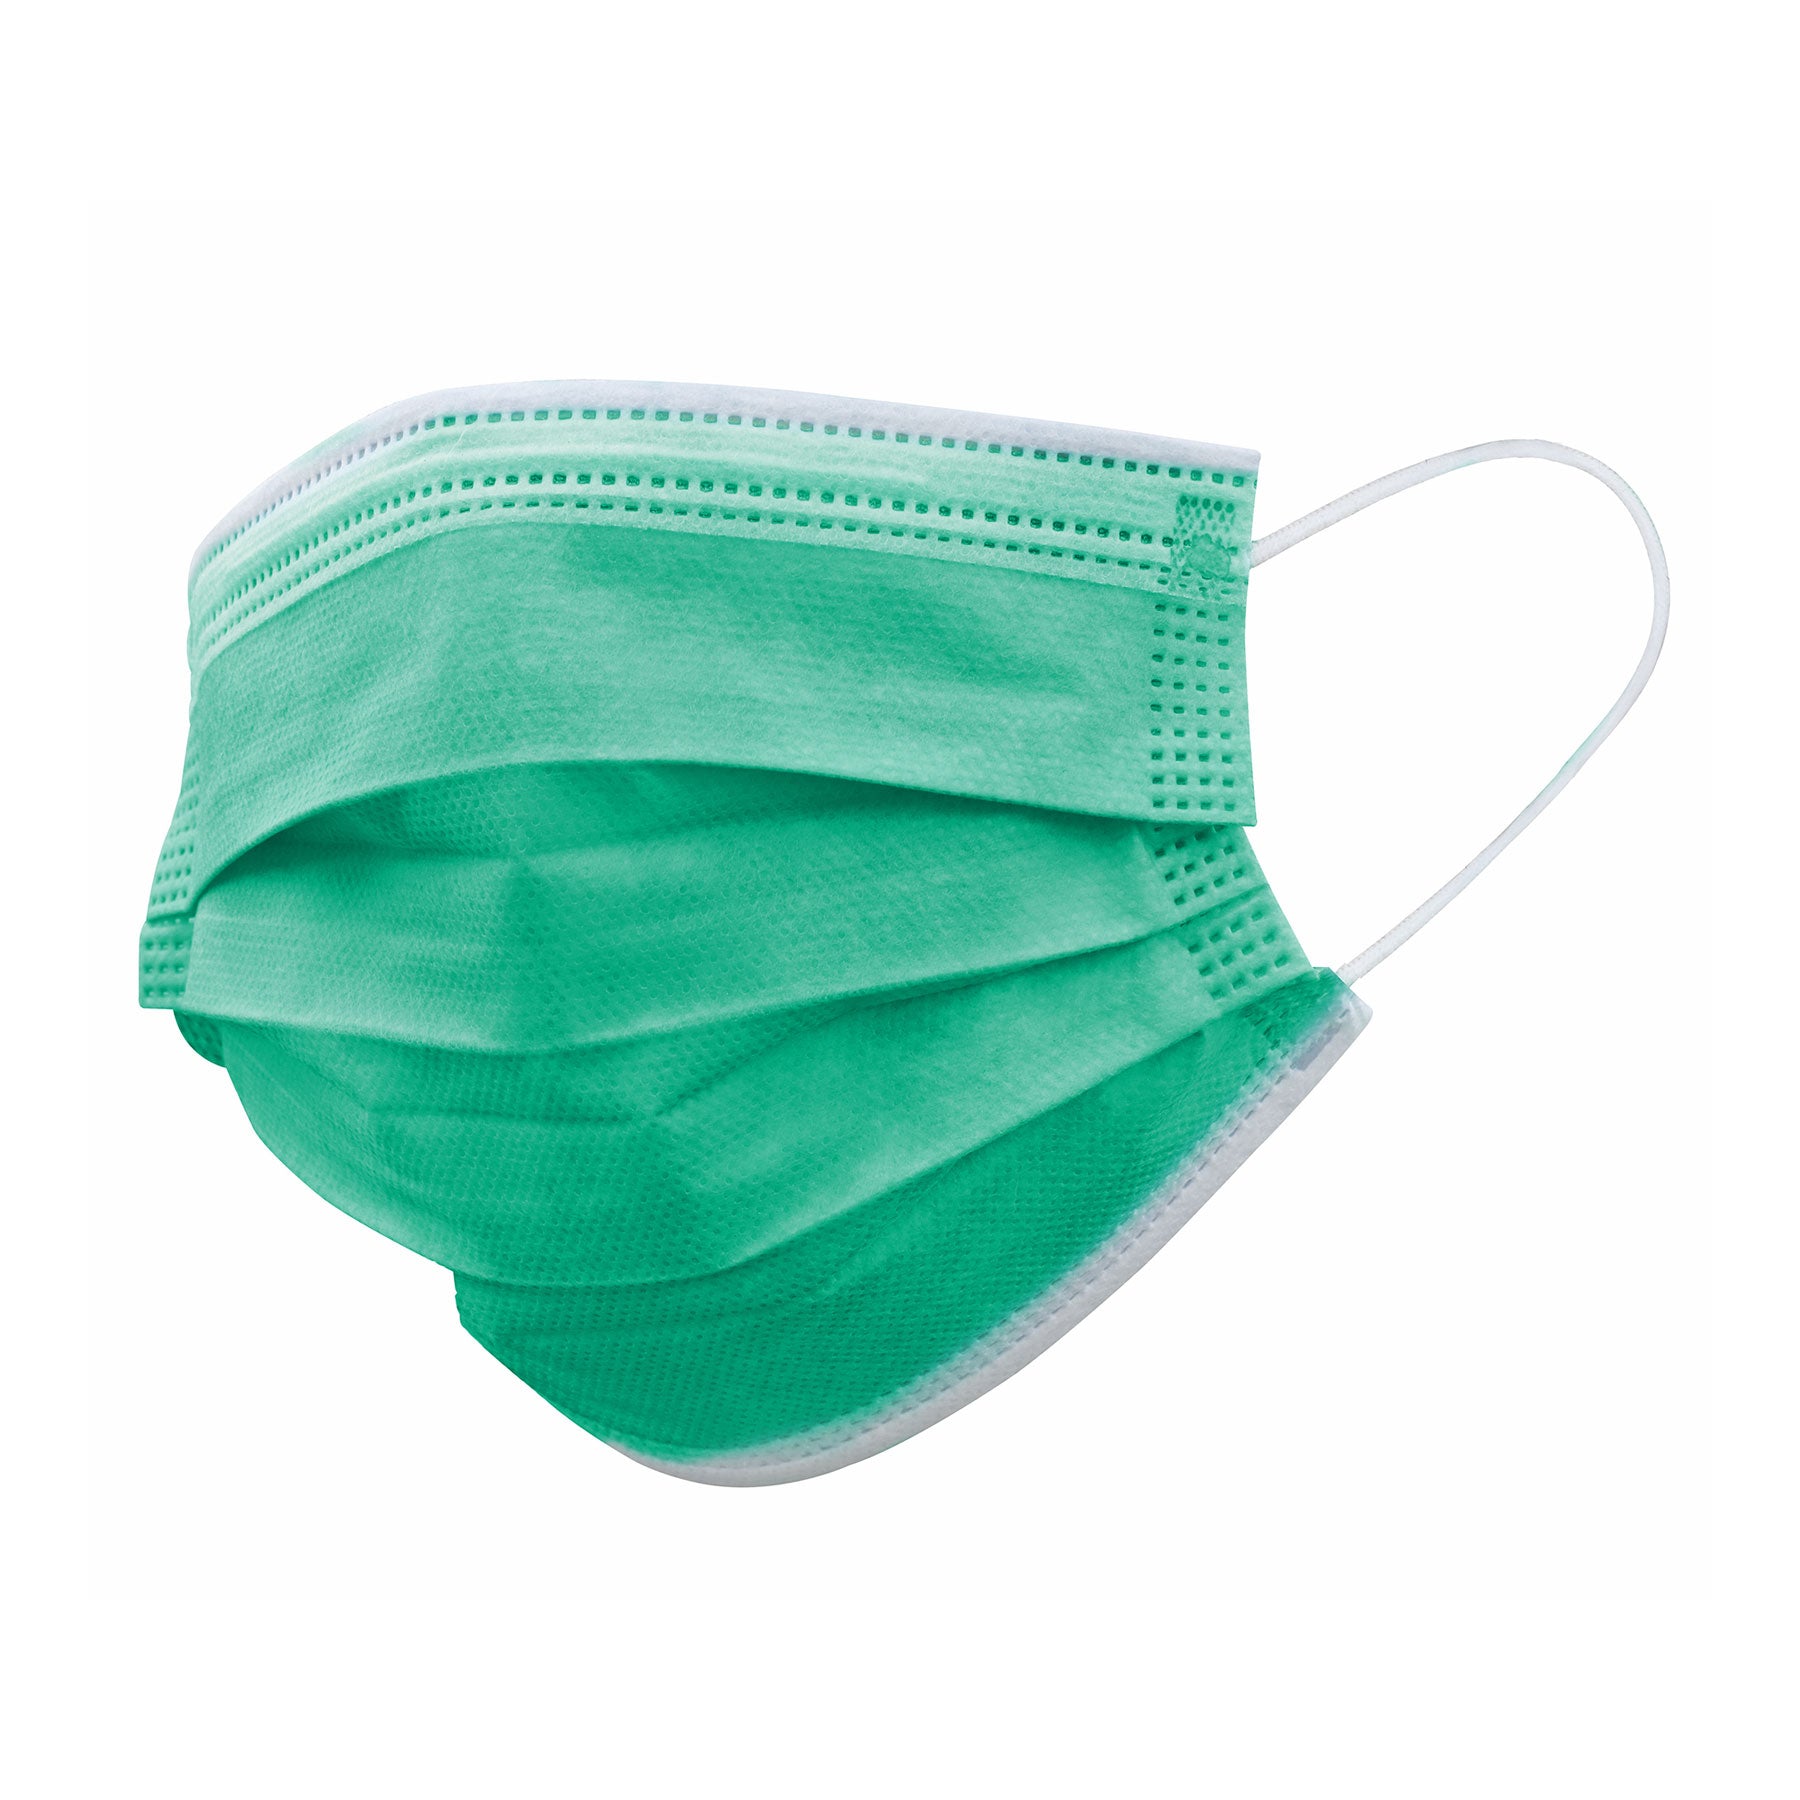 Swenco STLFLX Airguardz SEN-730 Green surgical procedure face mask ASTM F2100 Level 3 Made in Canada